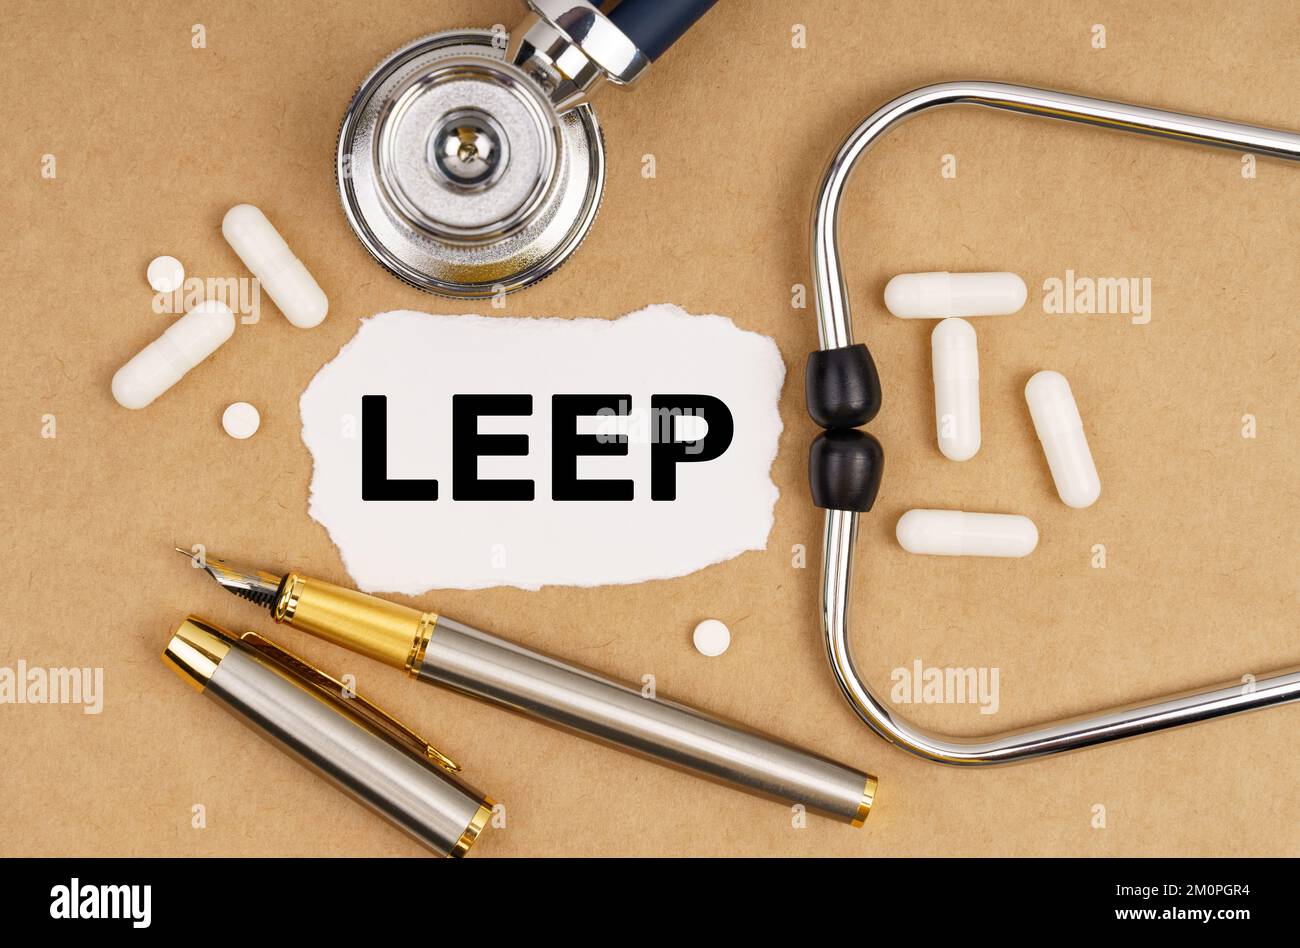 Medicine and health concept. On the table is a stethoscope, pills, a pen and paper with the inscription - LEEP Stock Photo